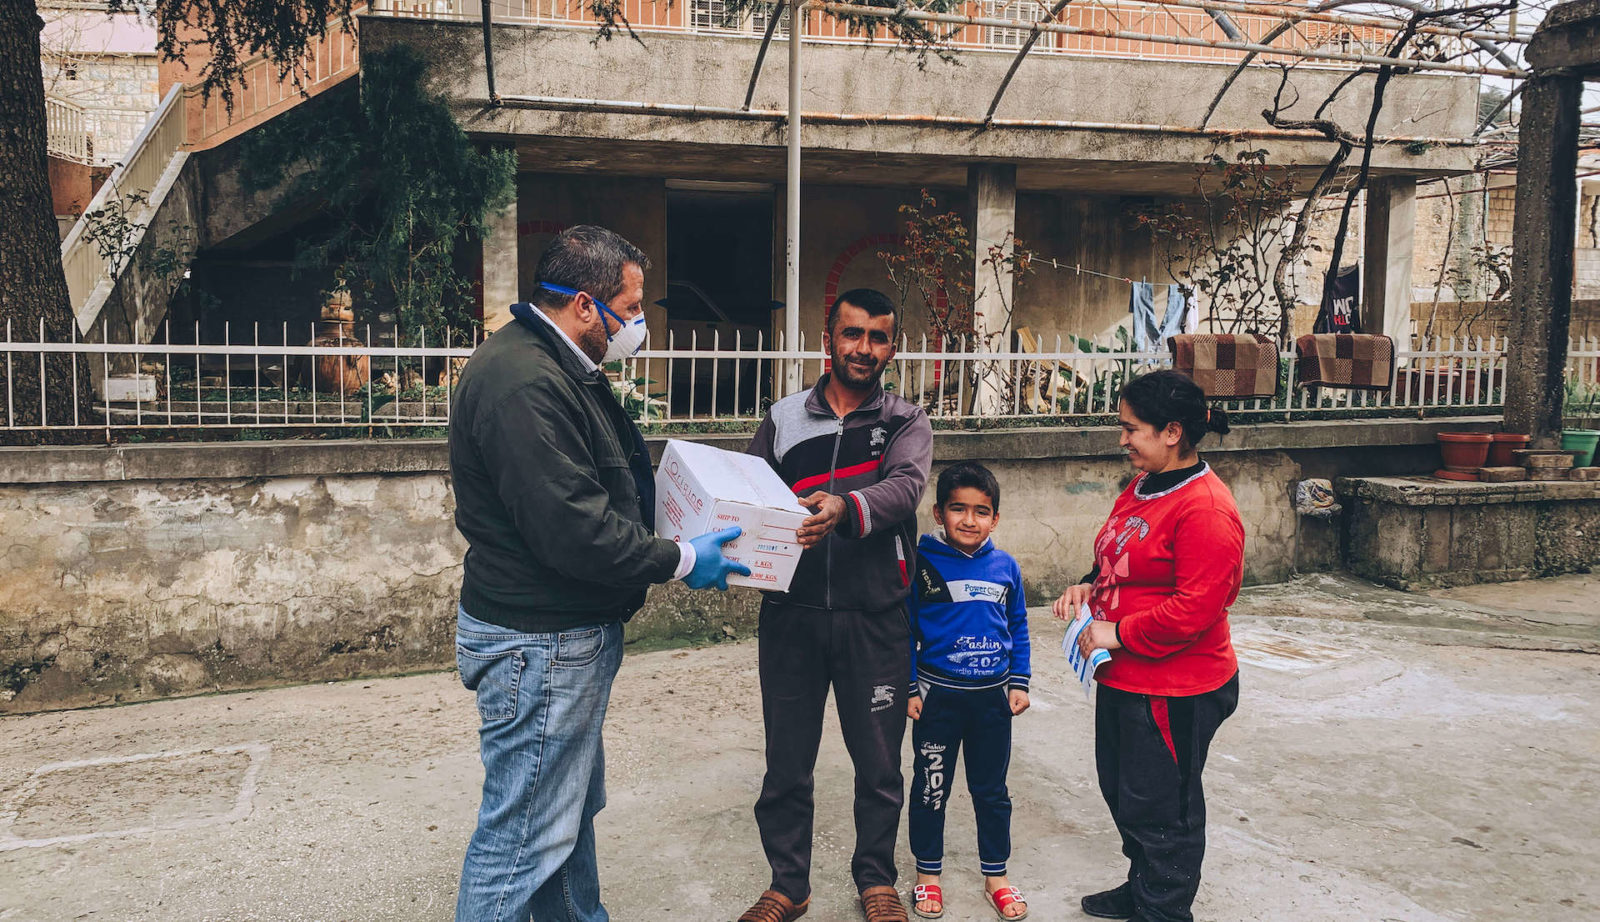 Help The Persecuted‘s Field Team in Lebanon delivers critical care supplies